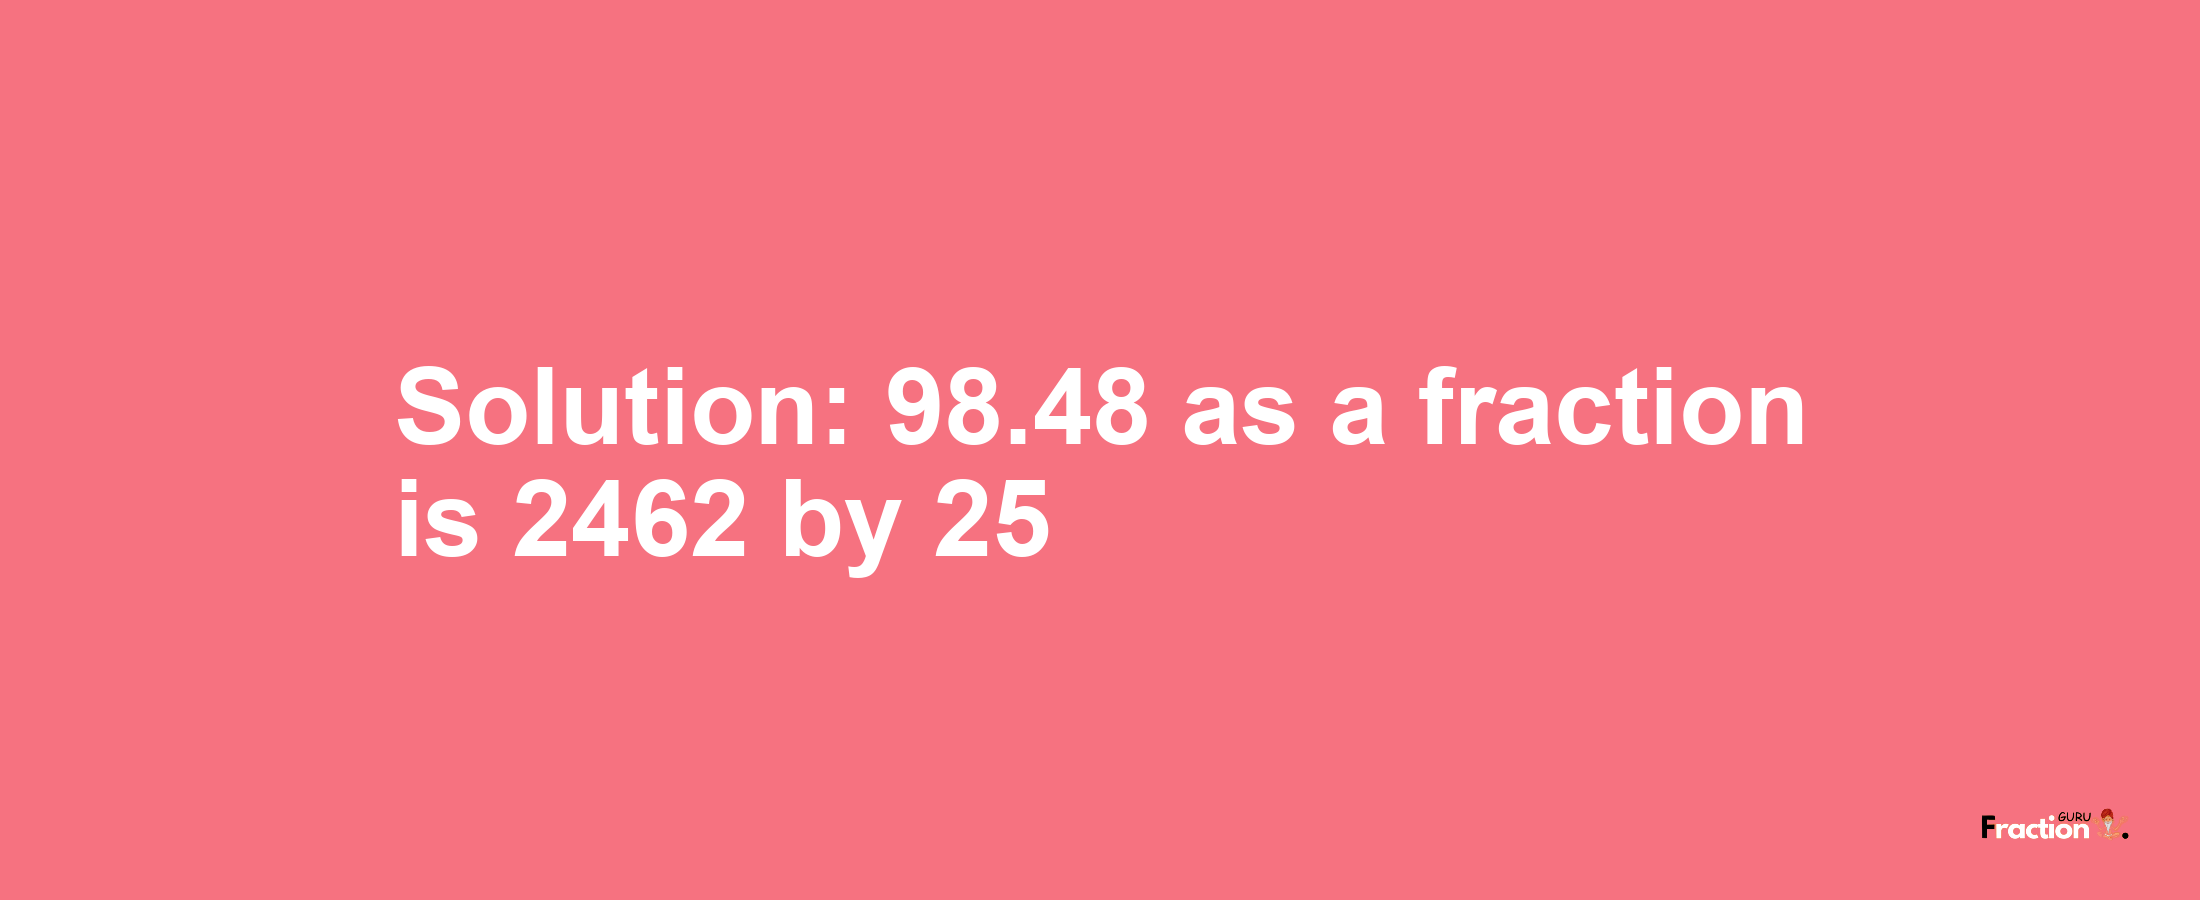 Solution:98.48 as a fraction is 2462/25